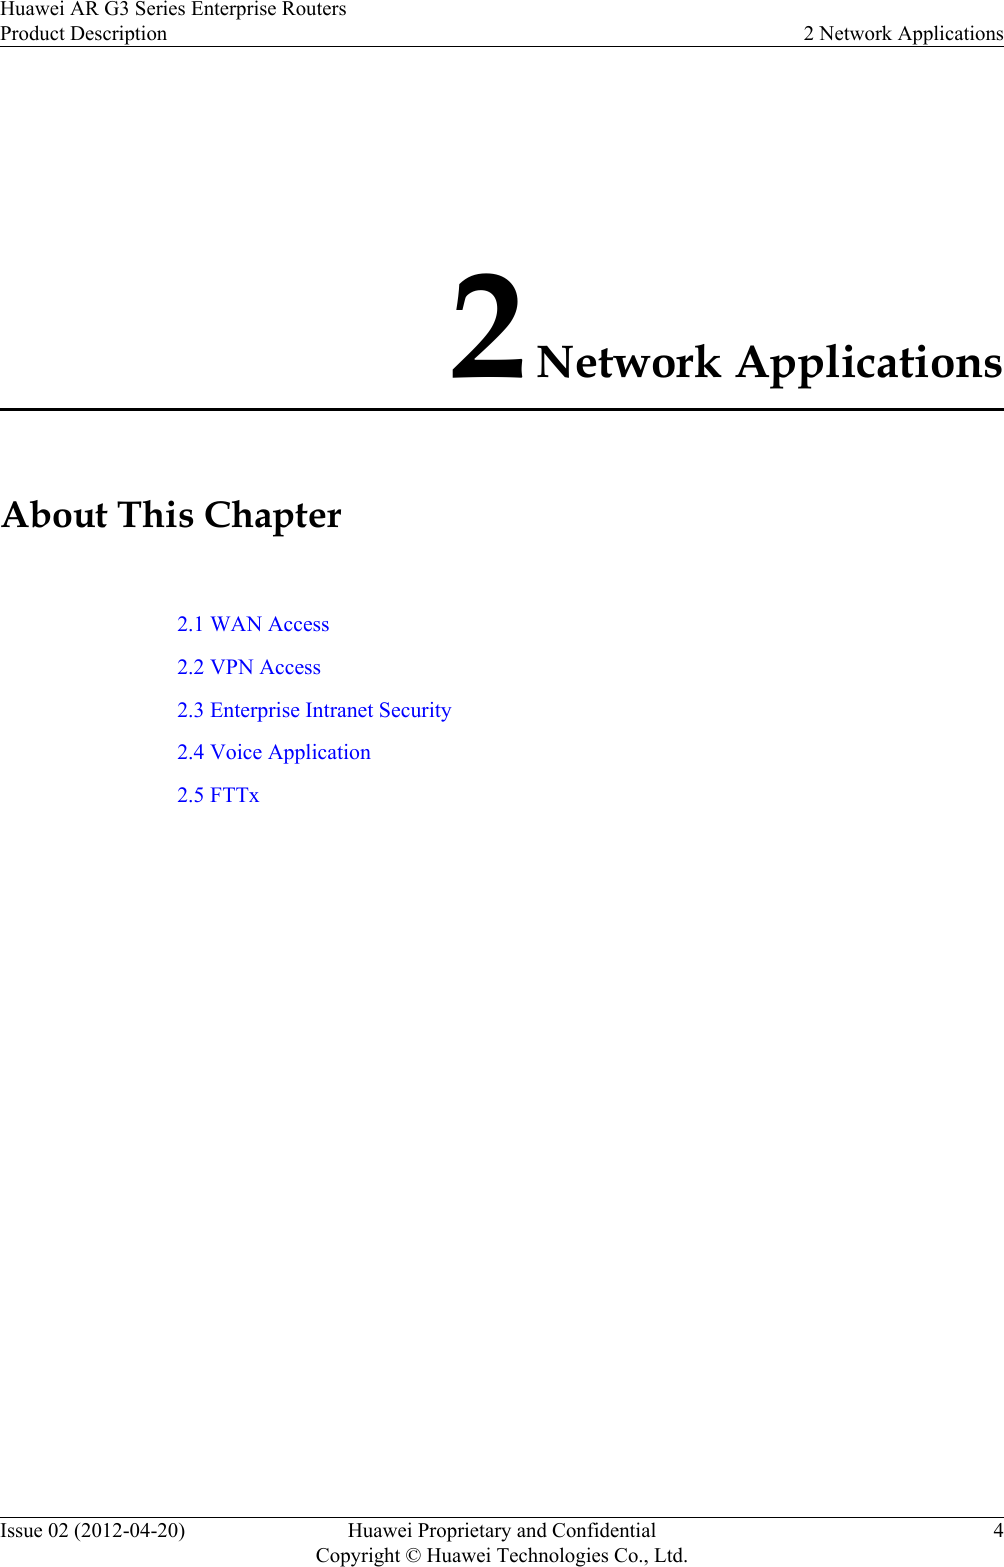 2 Network ApplicationsAbout This Chapter2.1 WAN Access2.2 VPN Access2.3 Enterprise Intranet Security2.4 Voice Application2.5 FTTxHuawei AR G3 Series Enterprise RoutersProduct Description 2 Network ApplicationsIssue 02 (2012-04-20) Huawei Proprietary and ConfidentialCopyright © Huawei Technologies Co., Ltd.4